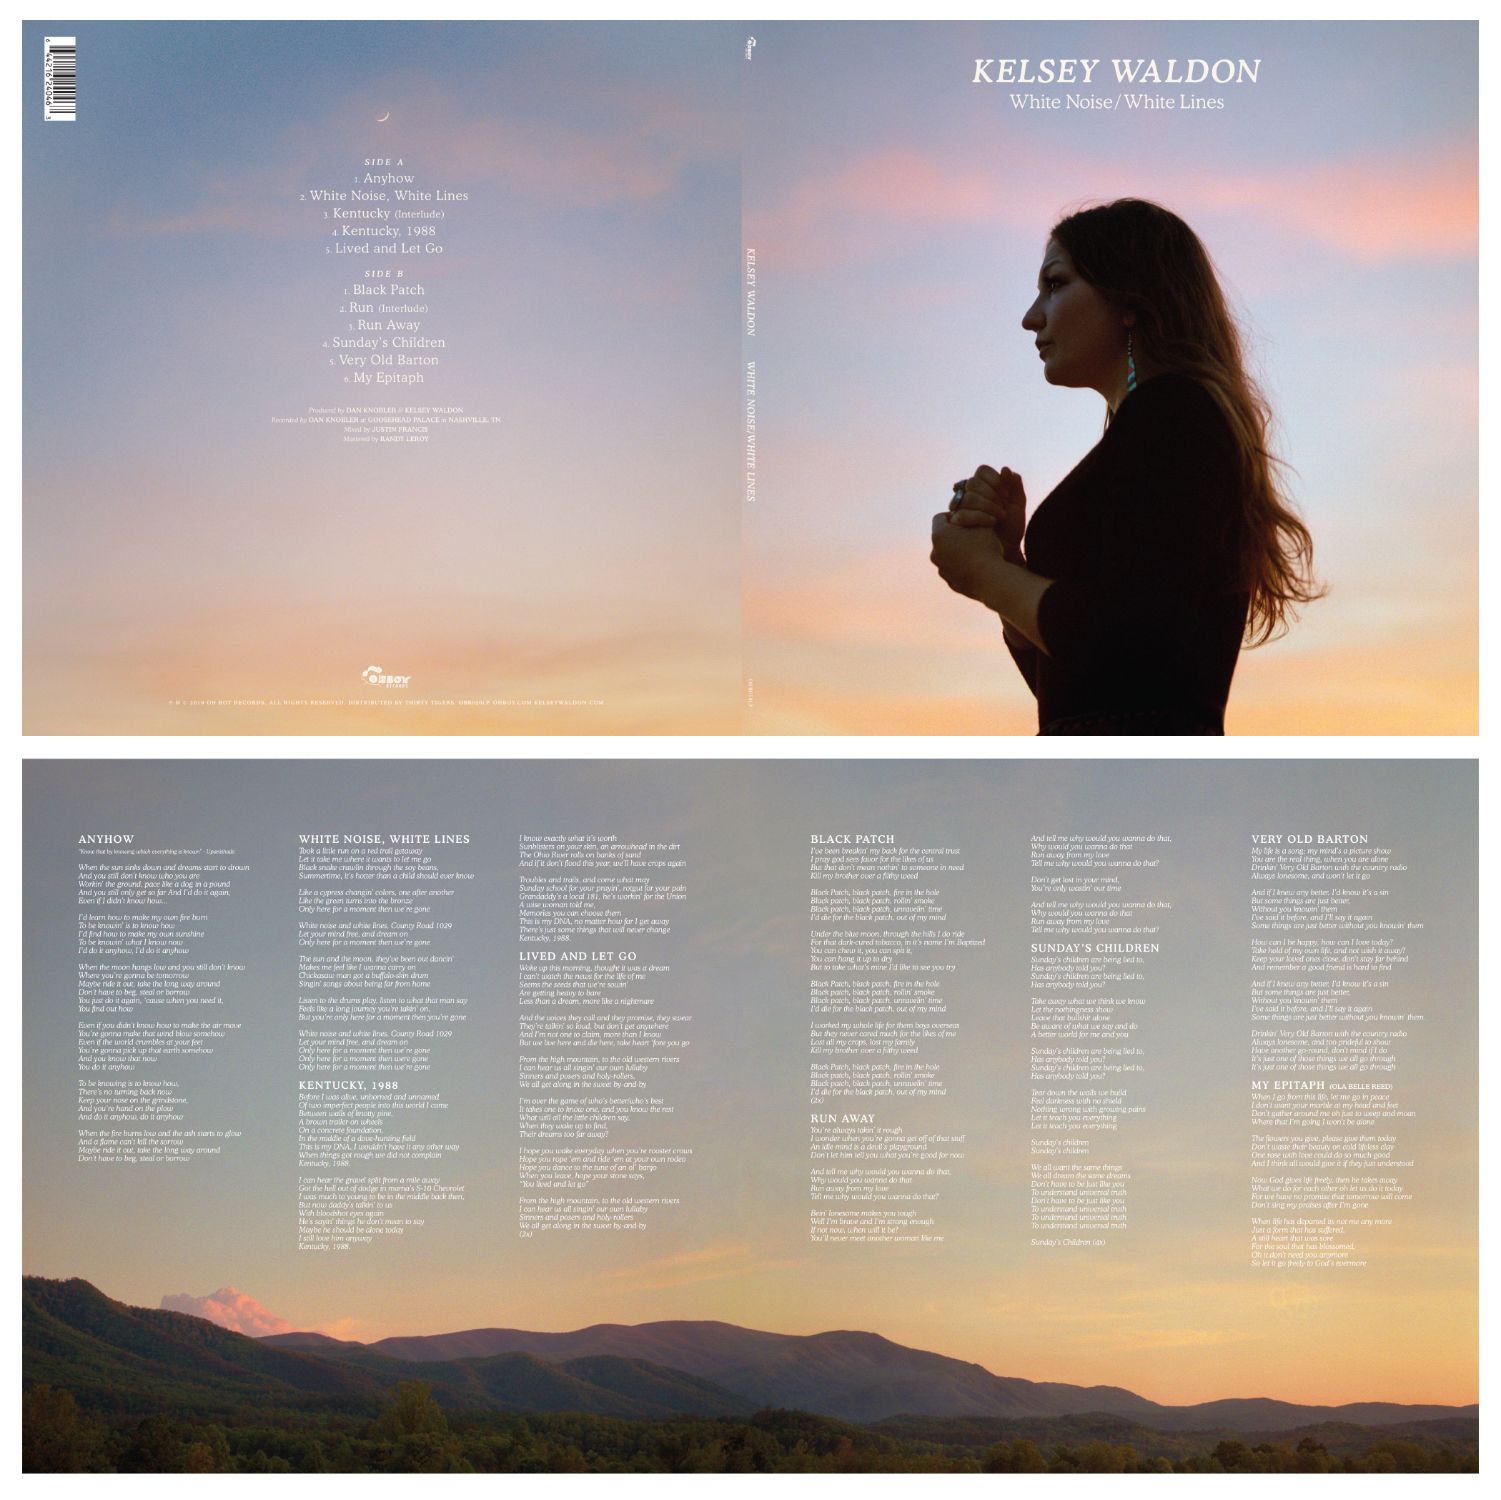 Kelsey Waldon, "White Noise/White Lines" Album | 2019 Oh Boy Records, Distributed by Thirty Tigers